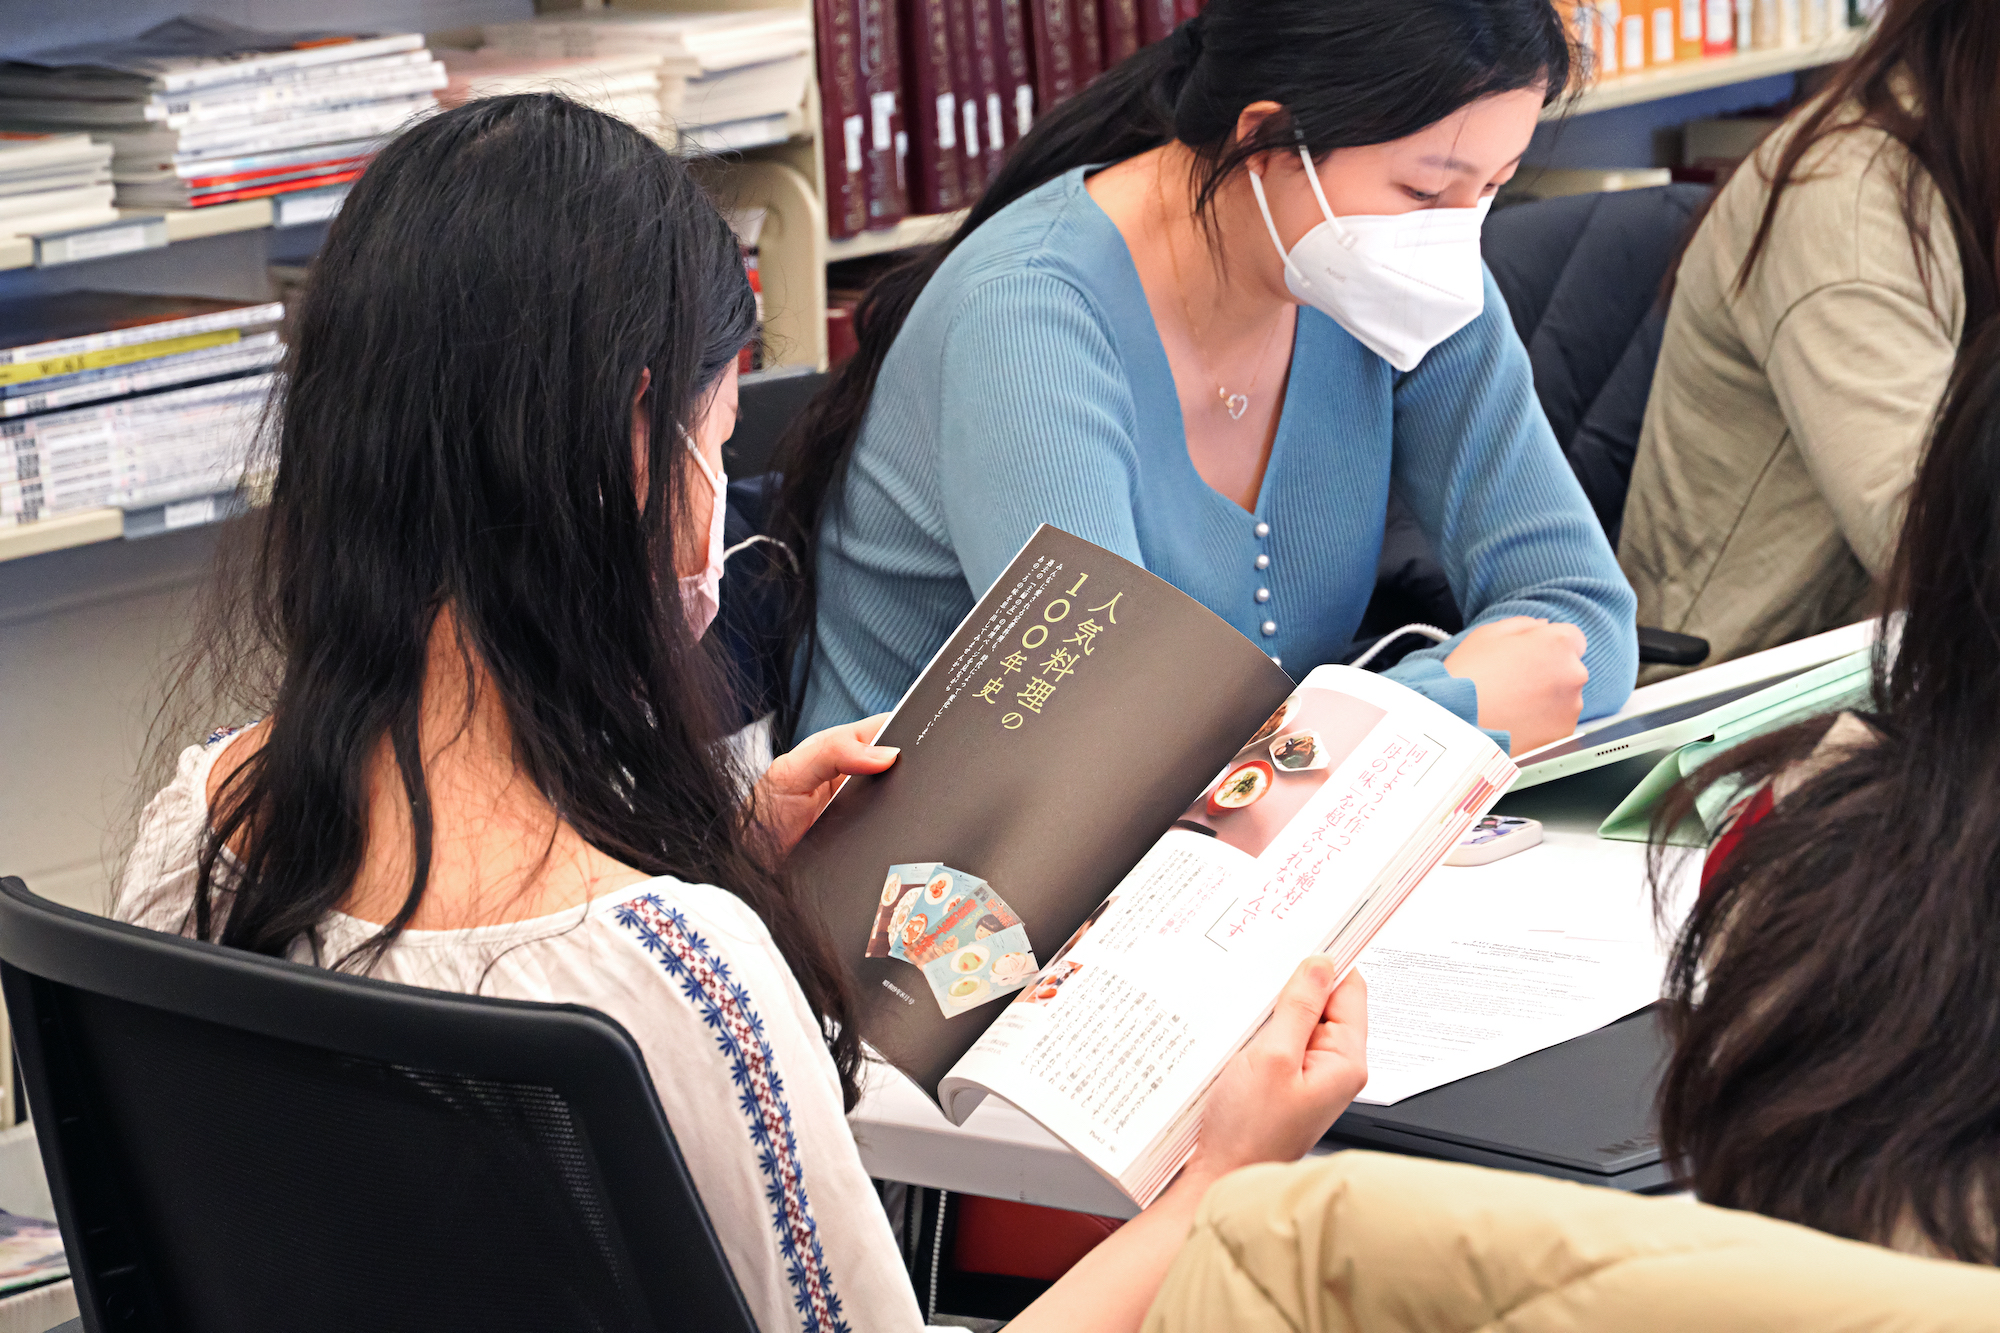 Students in face masks look at Japanese food books in Van Pelt Library